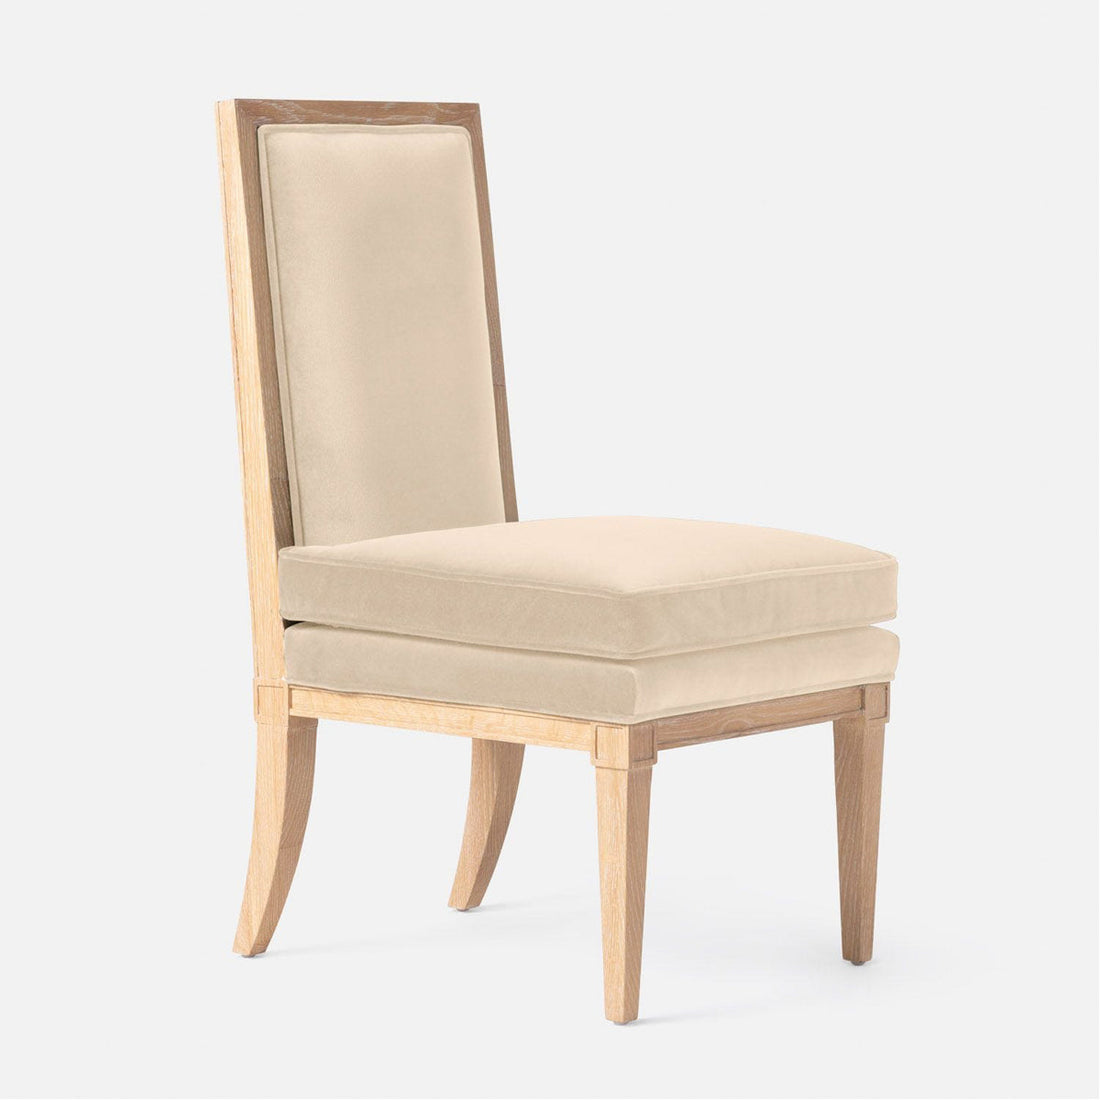 Made Goods Evan Upholstered Dining Chair in Pagua Fabric